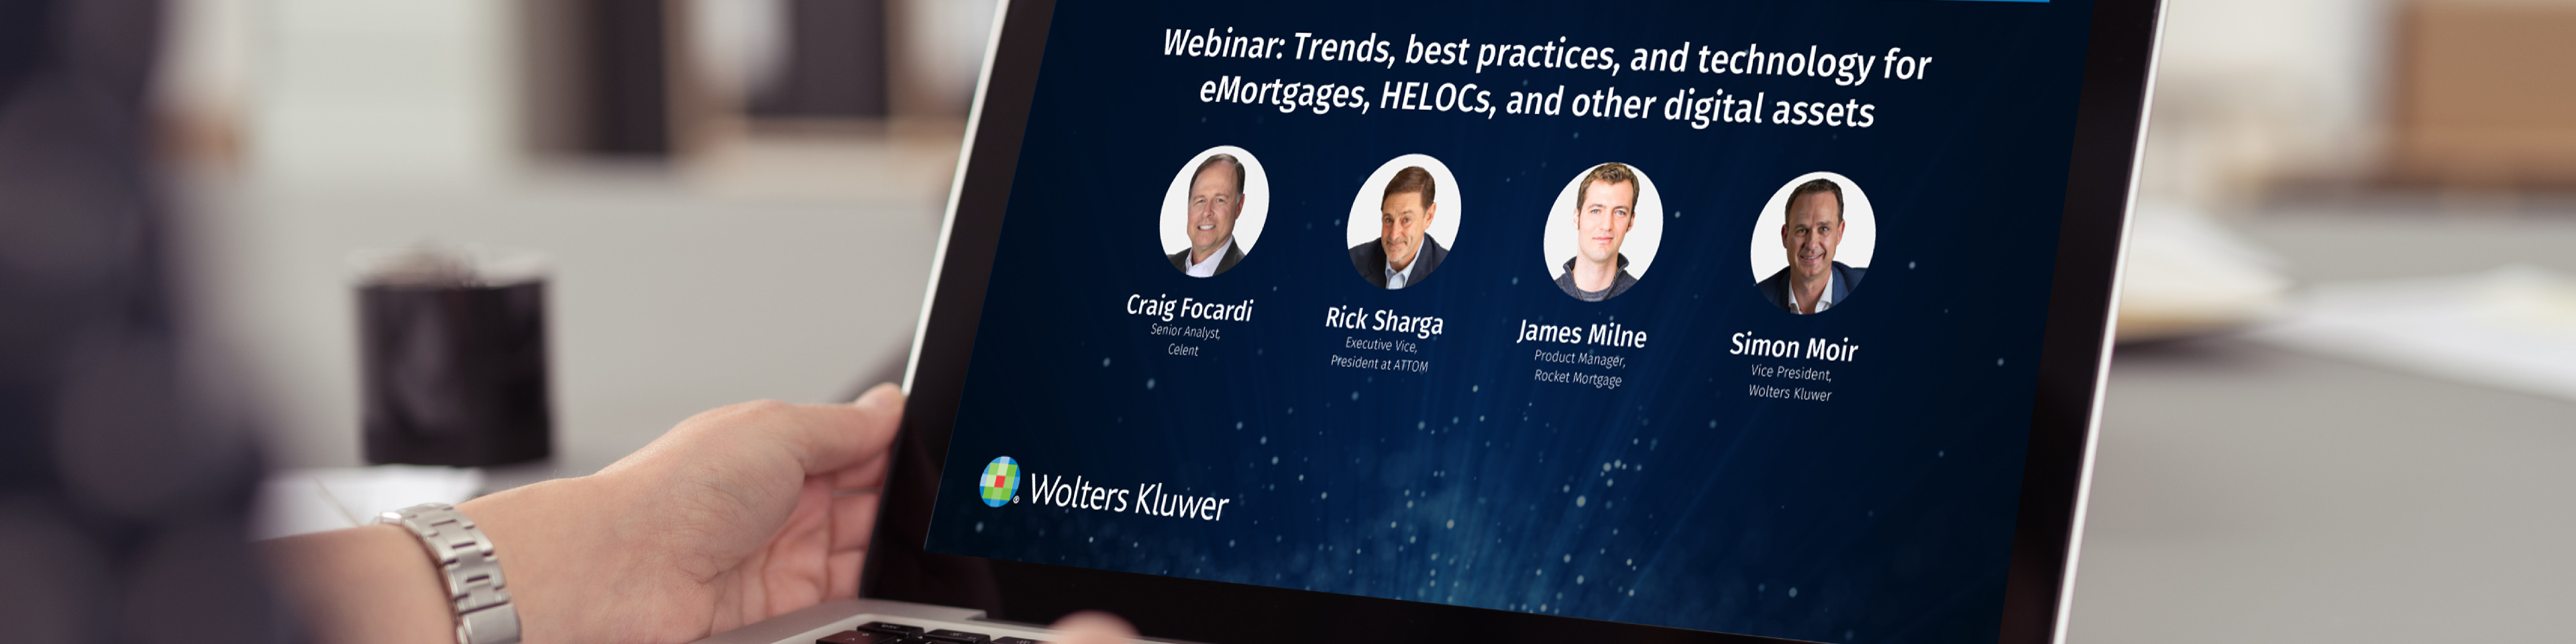 Trends, best practices, and technology for eMortgages, HELOCs, and other digital assets